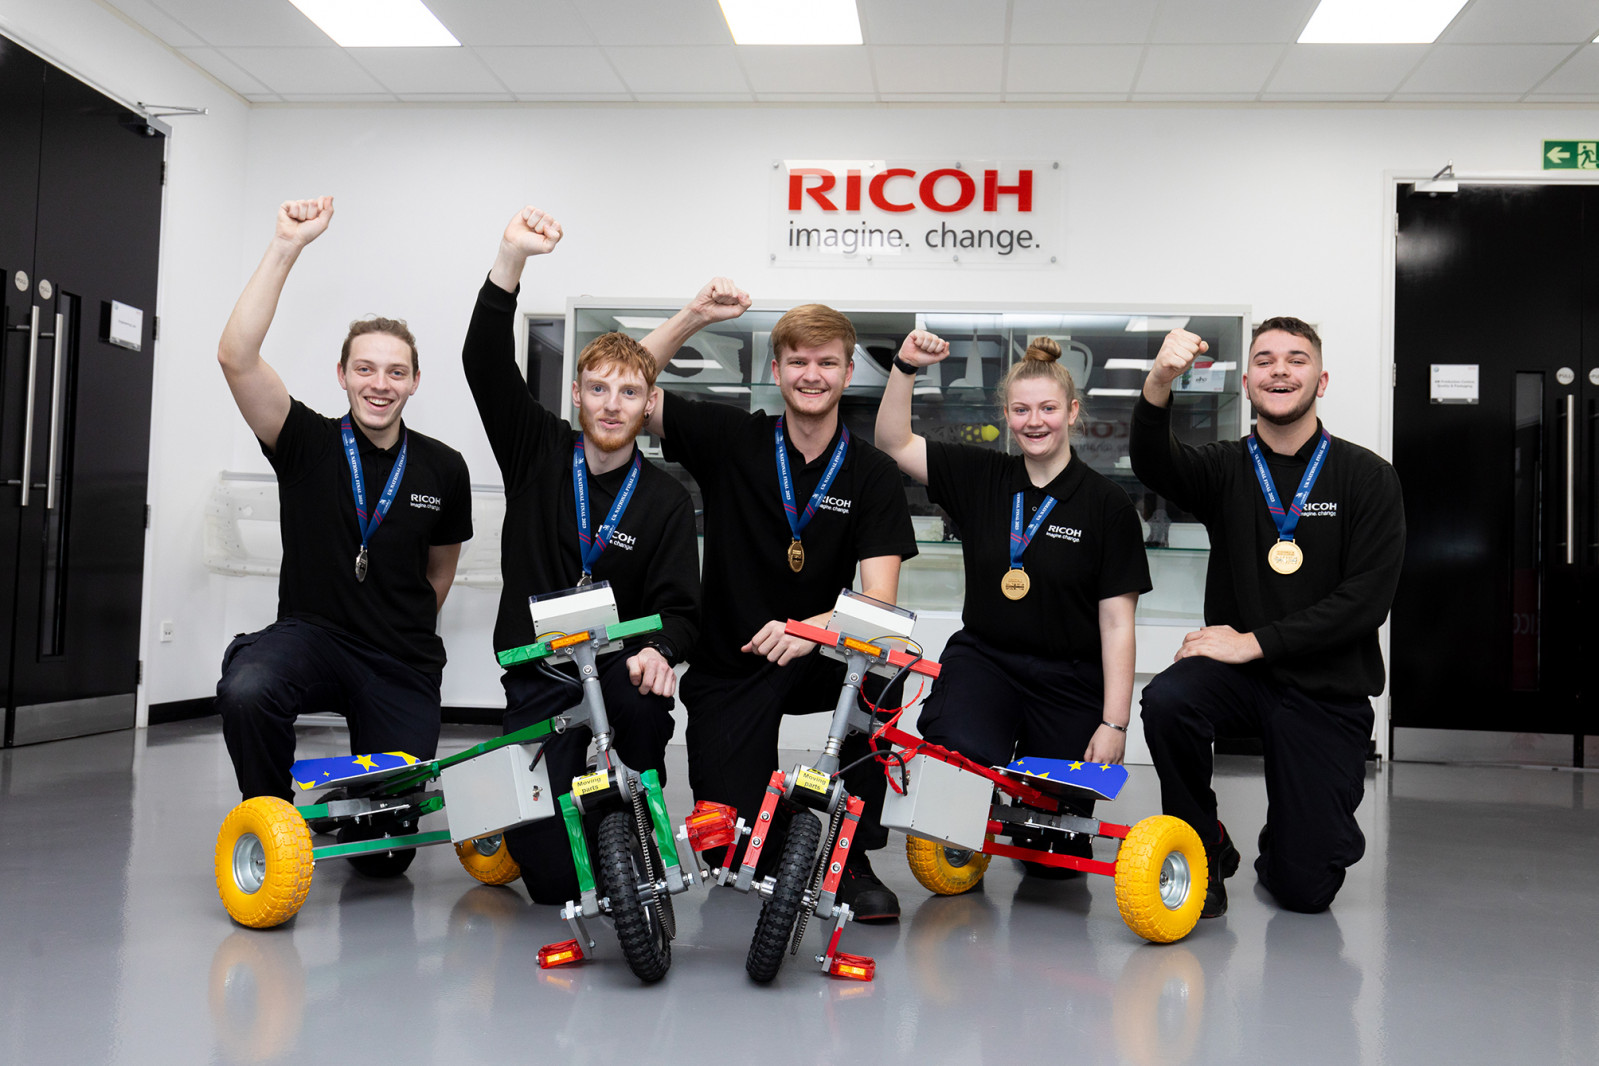 RPL Apprentices strike GOLD and SILVER at World Skills UK!